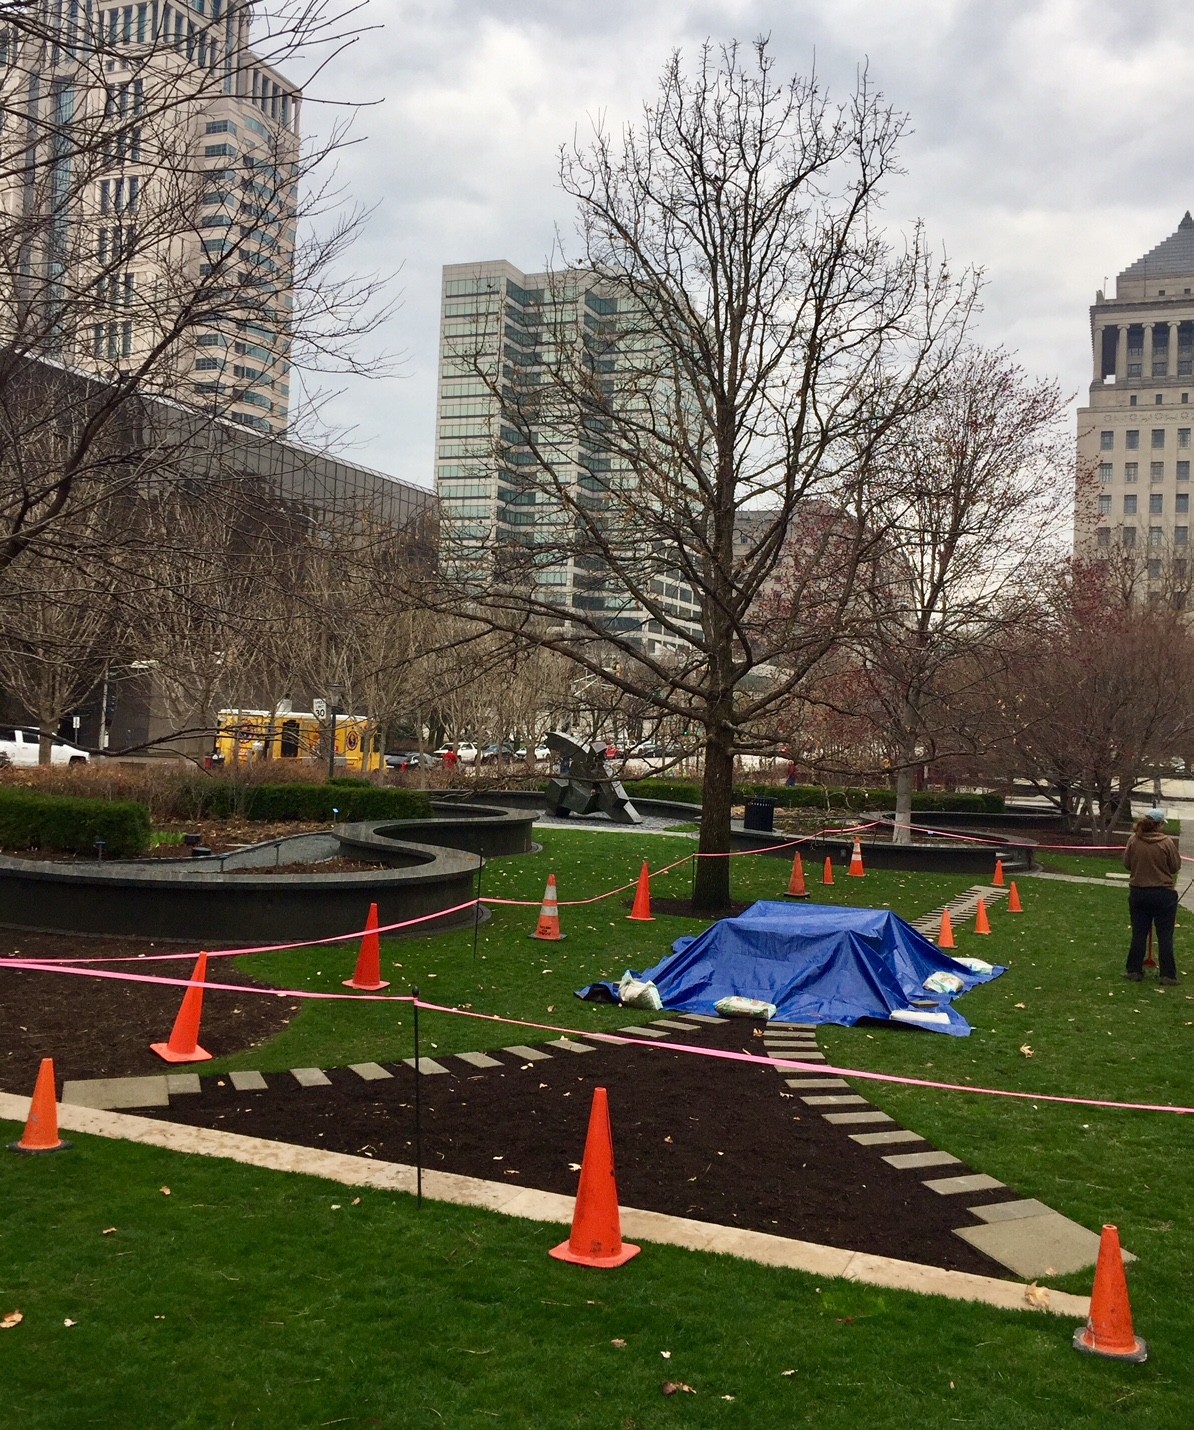 Citygarden Is Getting 3 New Sculptures With One Being Installed